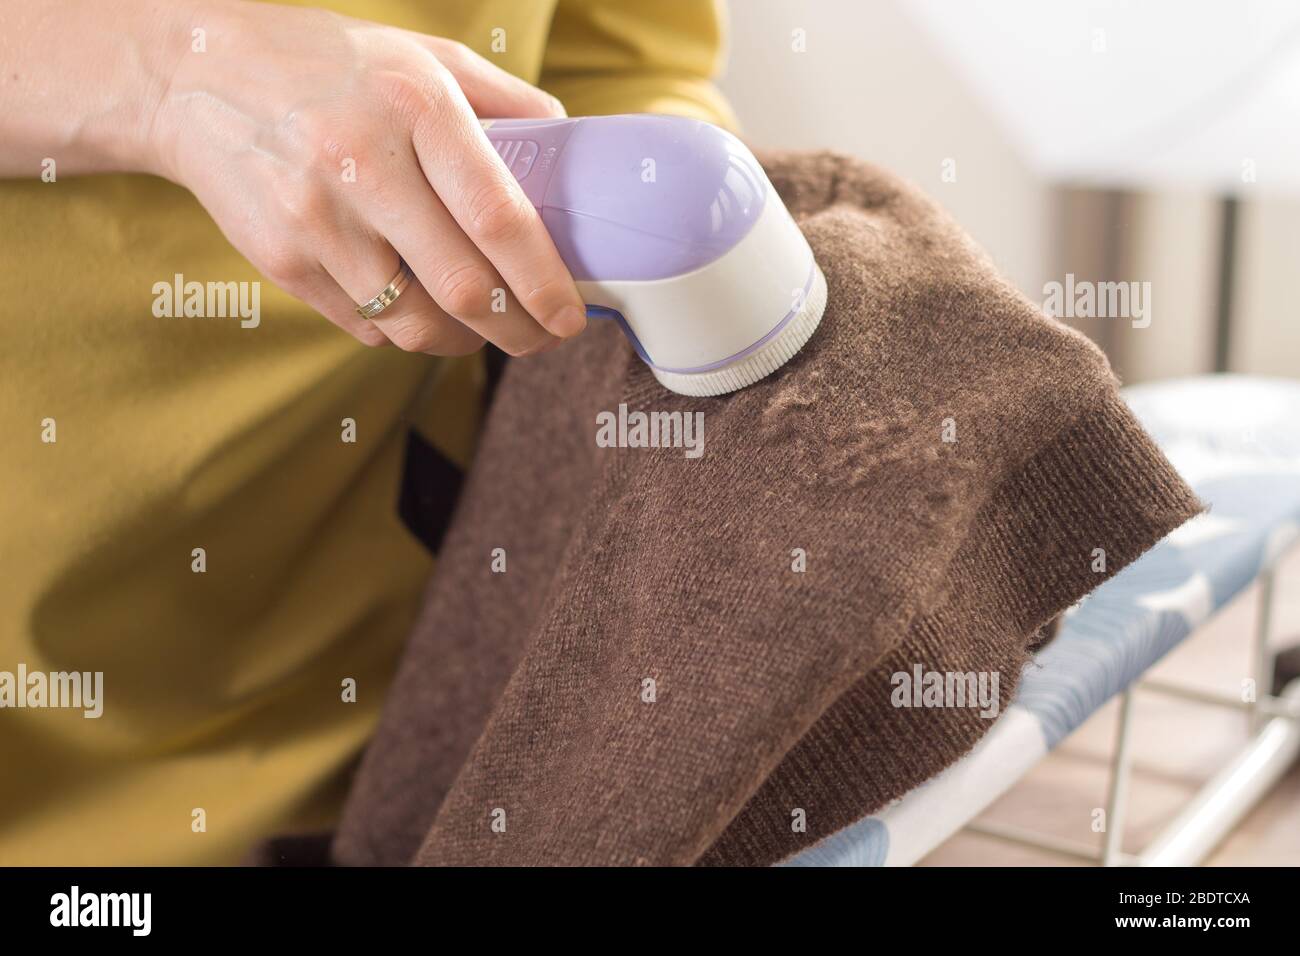 The woman holds an electric shaver in her hand to clean mottled clothes and cleans the sleeve of a brown wool sweater. Stock Photo